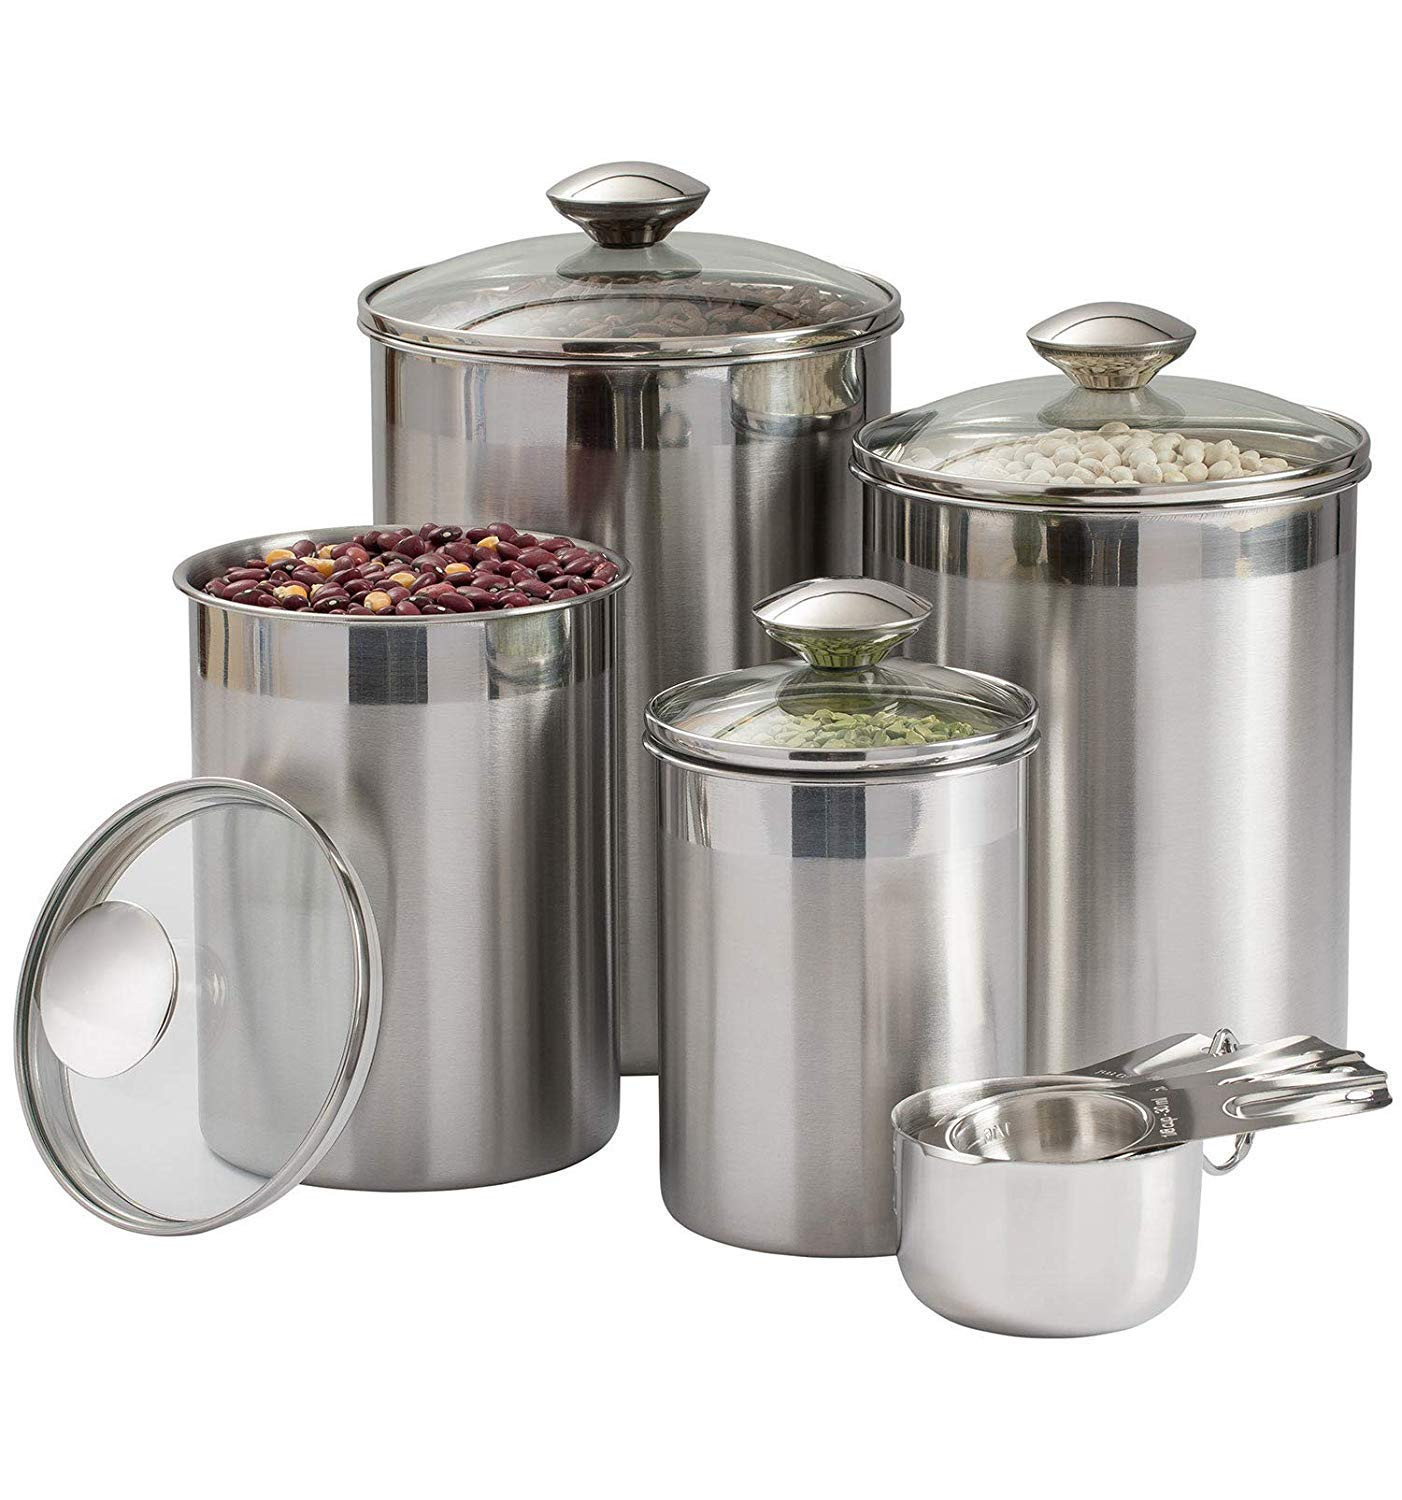 Kitchen Counter Canisters
 Beautiful Canisters Sets for the Kitchen Counter 8 Piece